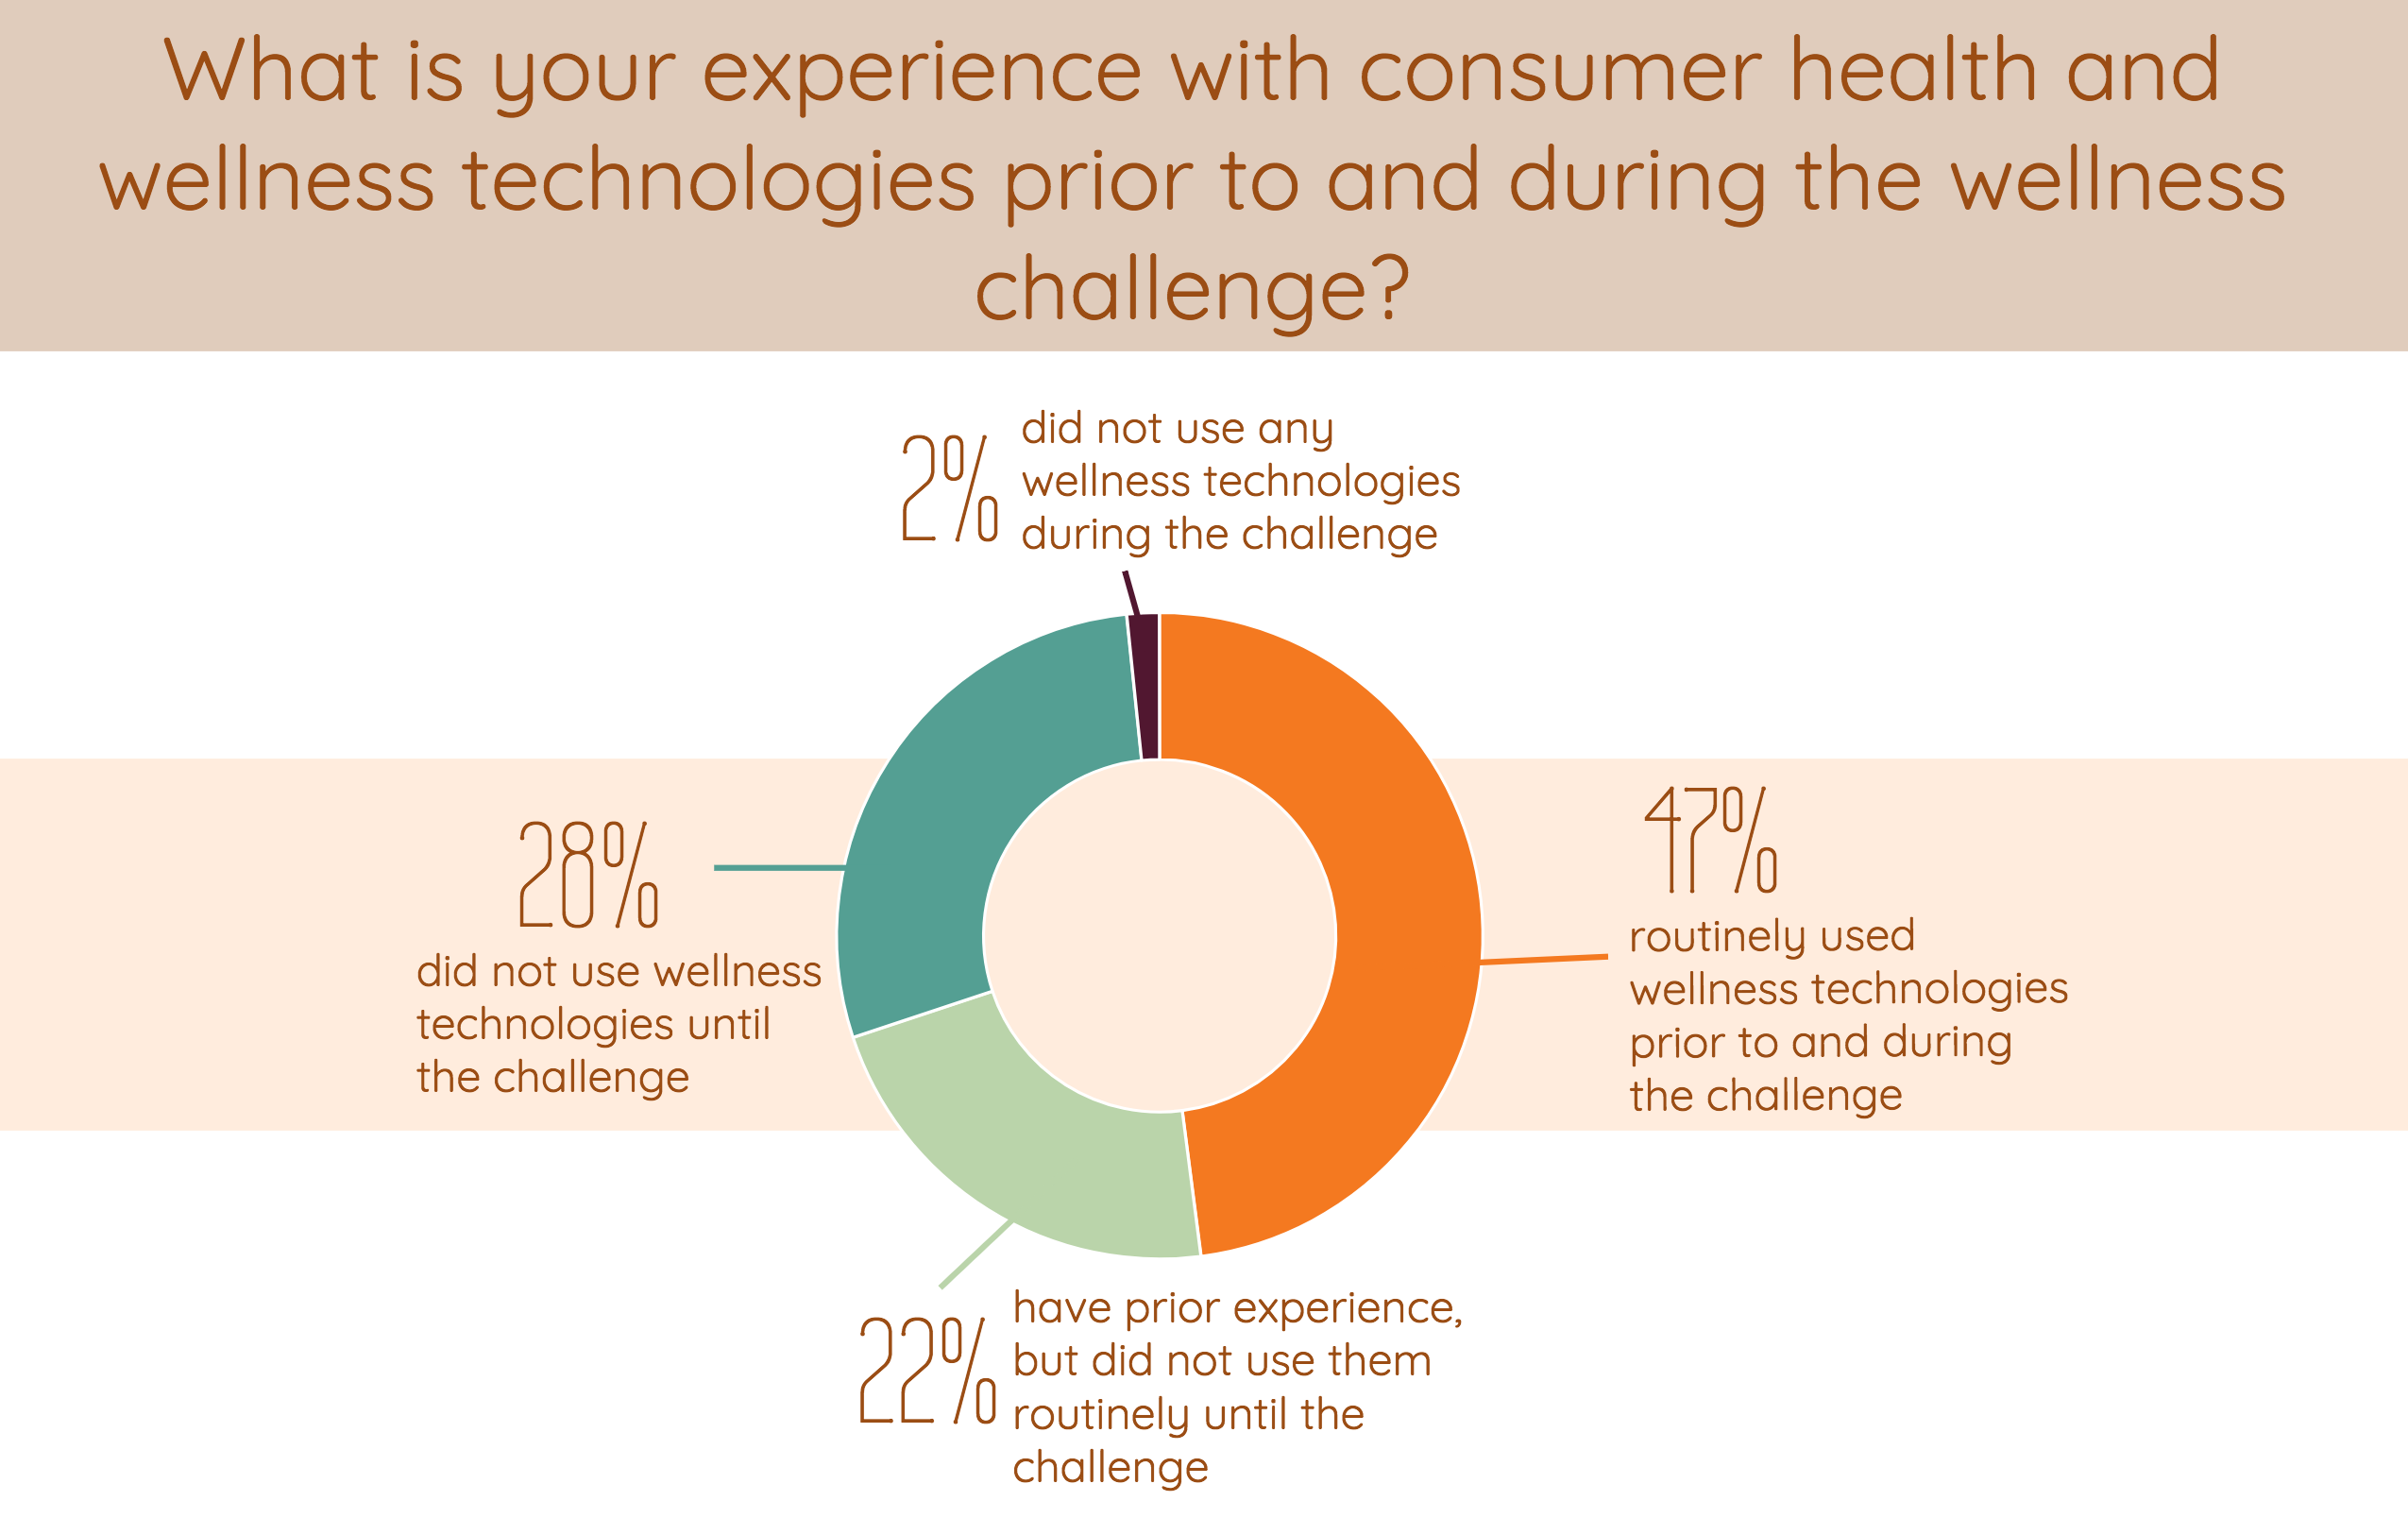 what is your experience with consumer health and wellness technologies prior to and during the wellness challenge? 